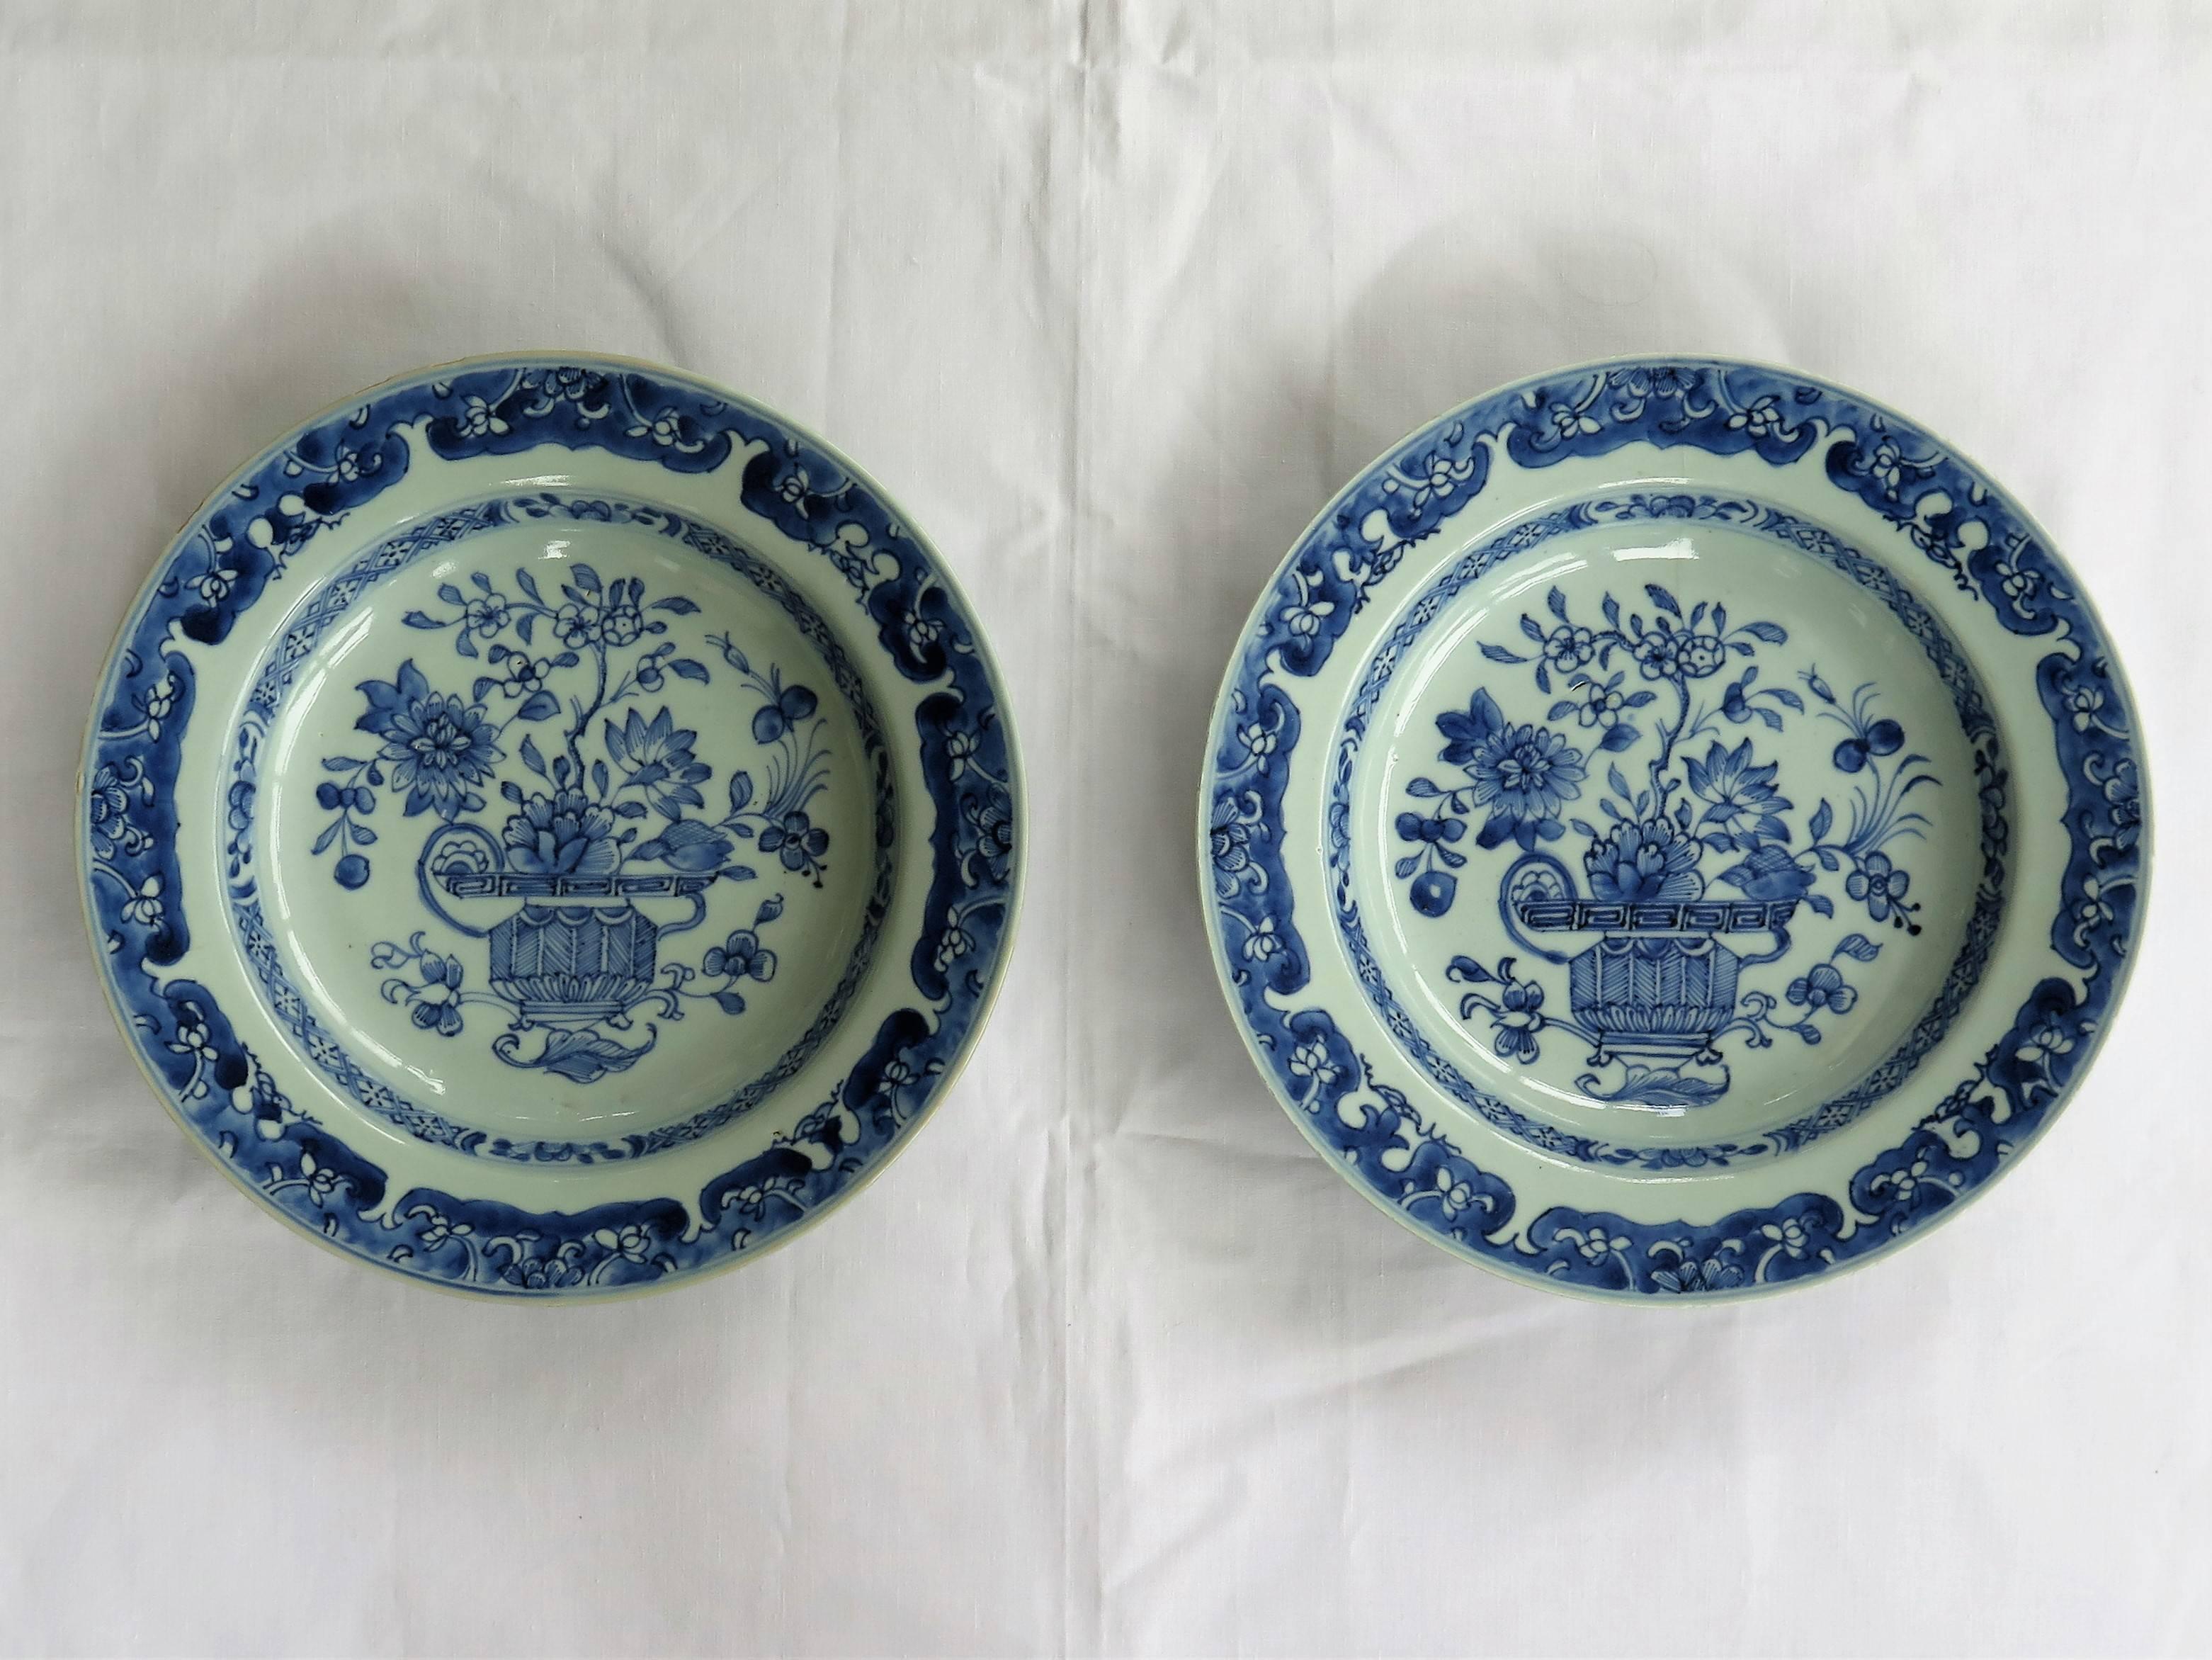 This is a very good pair of Chinese porcelain deep plates or bowls made for the export (Canton) market, during the second half of the 18th century, Qing-Qianlong period.

The plates are nicely hand potted with neatly trimmed foot rims. 

They